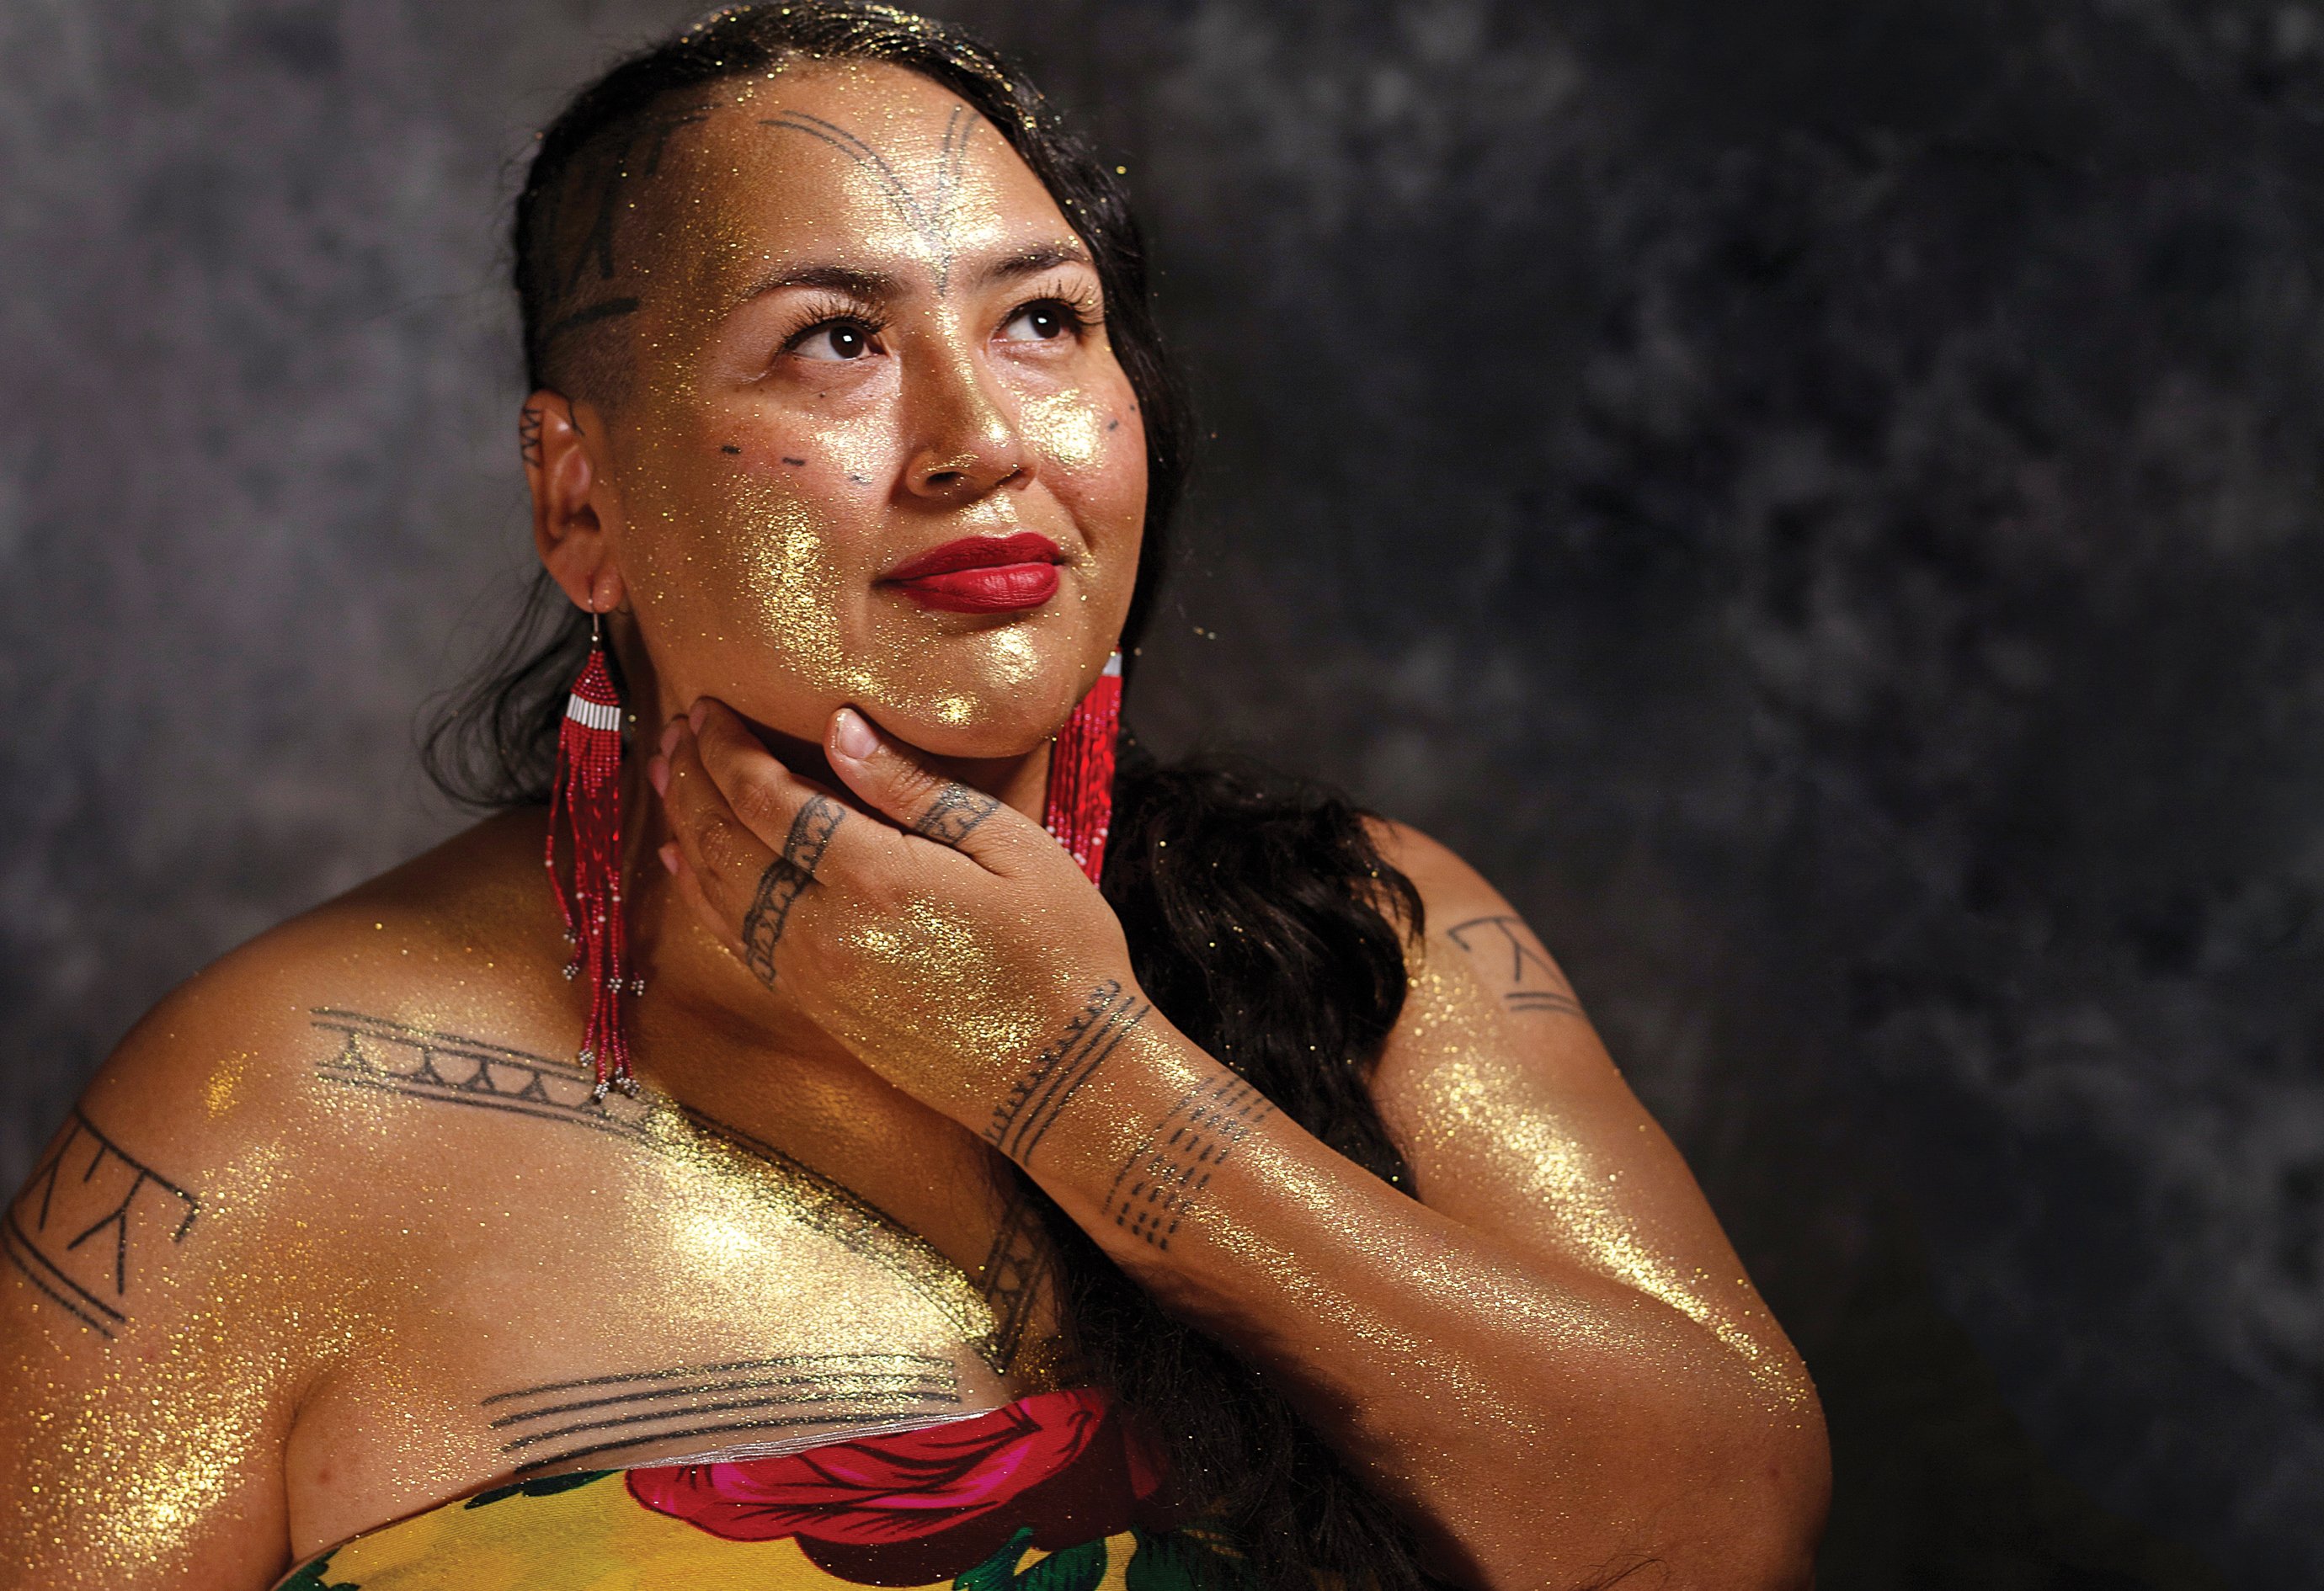 Hovak Johnston shows off her tunniit and kakiniit. Johnston learned traditional tattooing methods in an effort to reclaim the once outlawed practice.